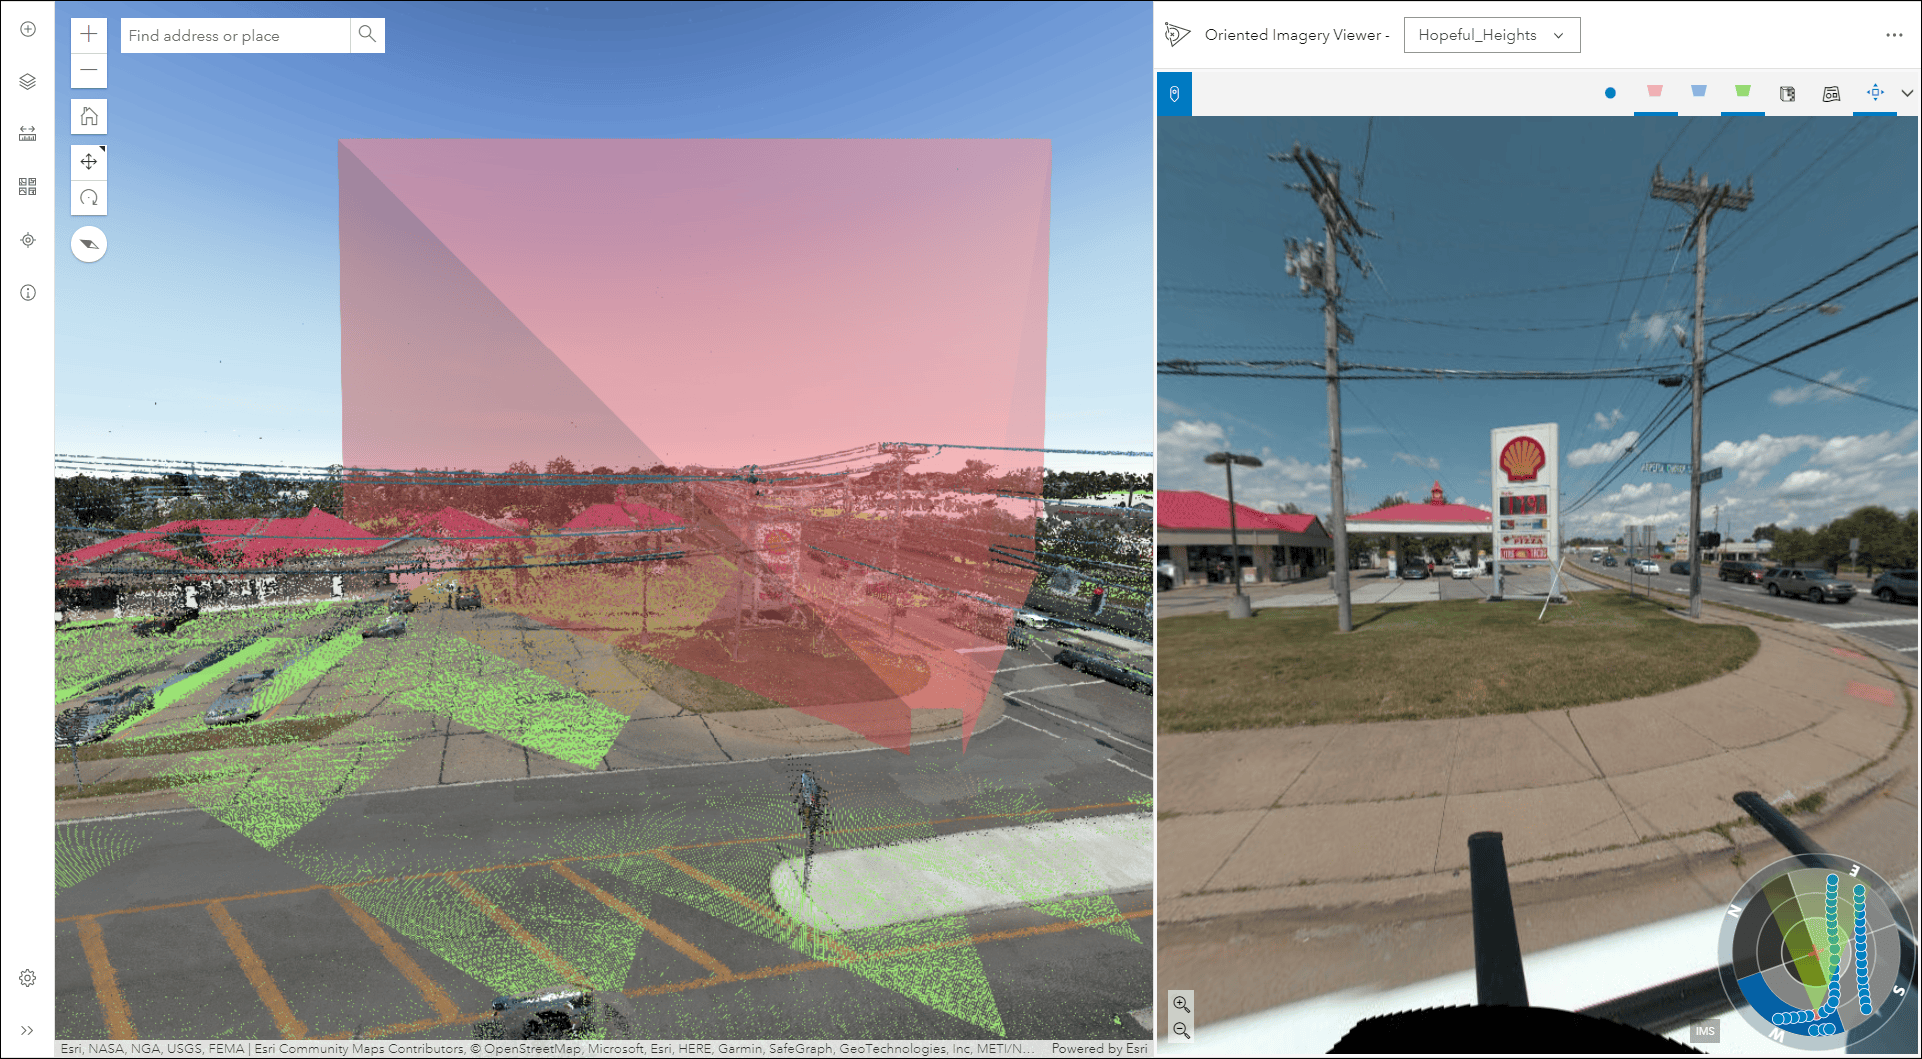 Screenshot of the Oriented Imagery Explorer web app showing a 3D scene on the left and a corresponding image on the right.